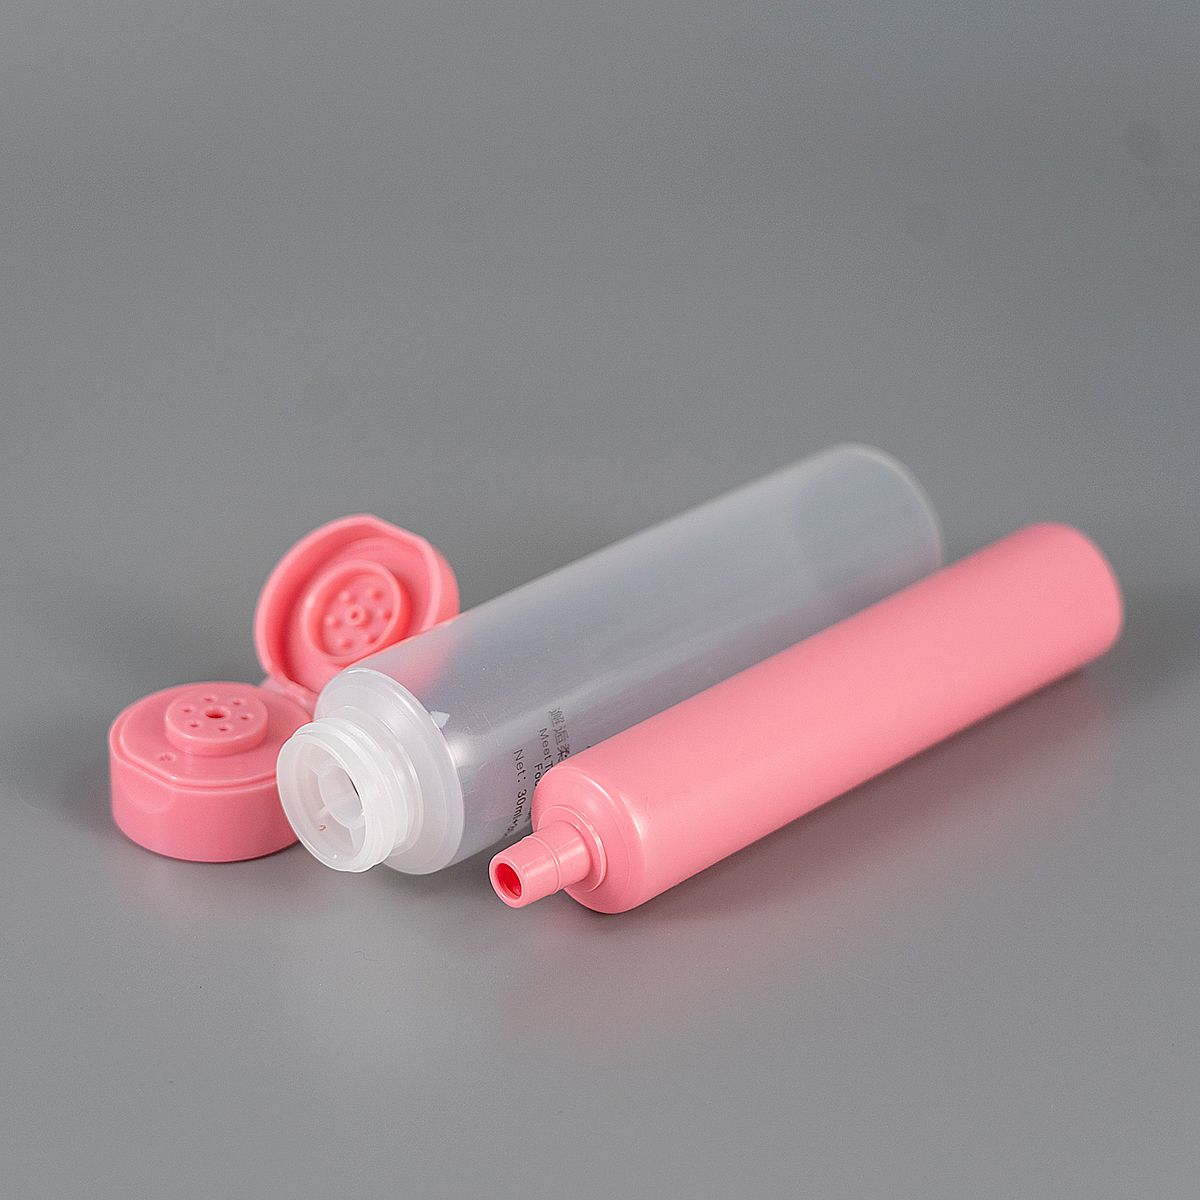 empty cosmetic dual chamber packaging tube for foot cream R-T35C12 - 루이스팩